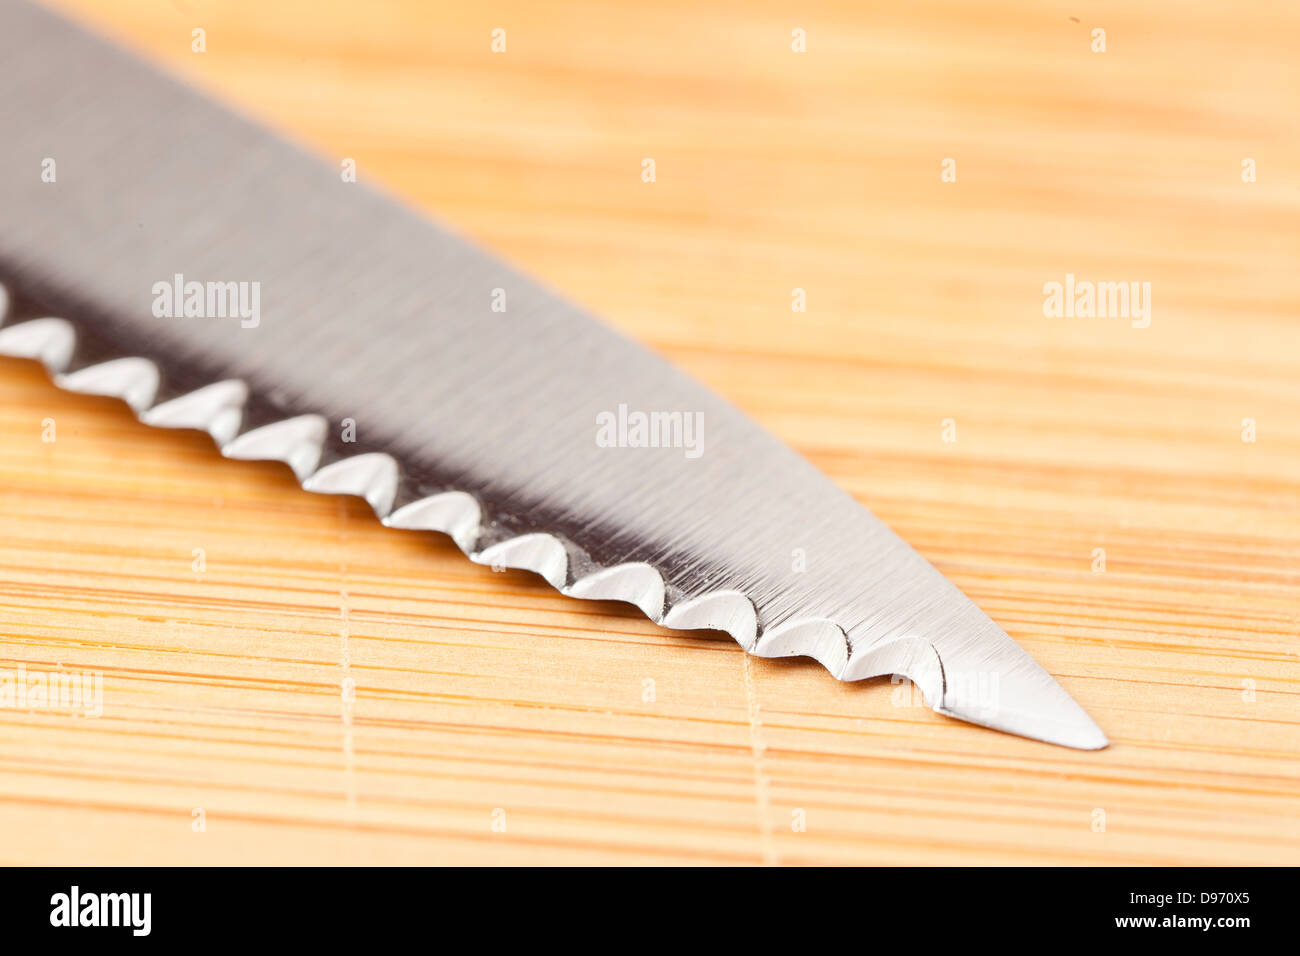 Shiny Metal knife on a wooden cutting board Stock Photo